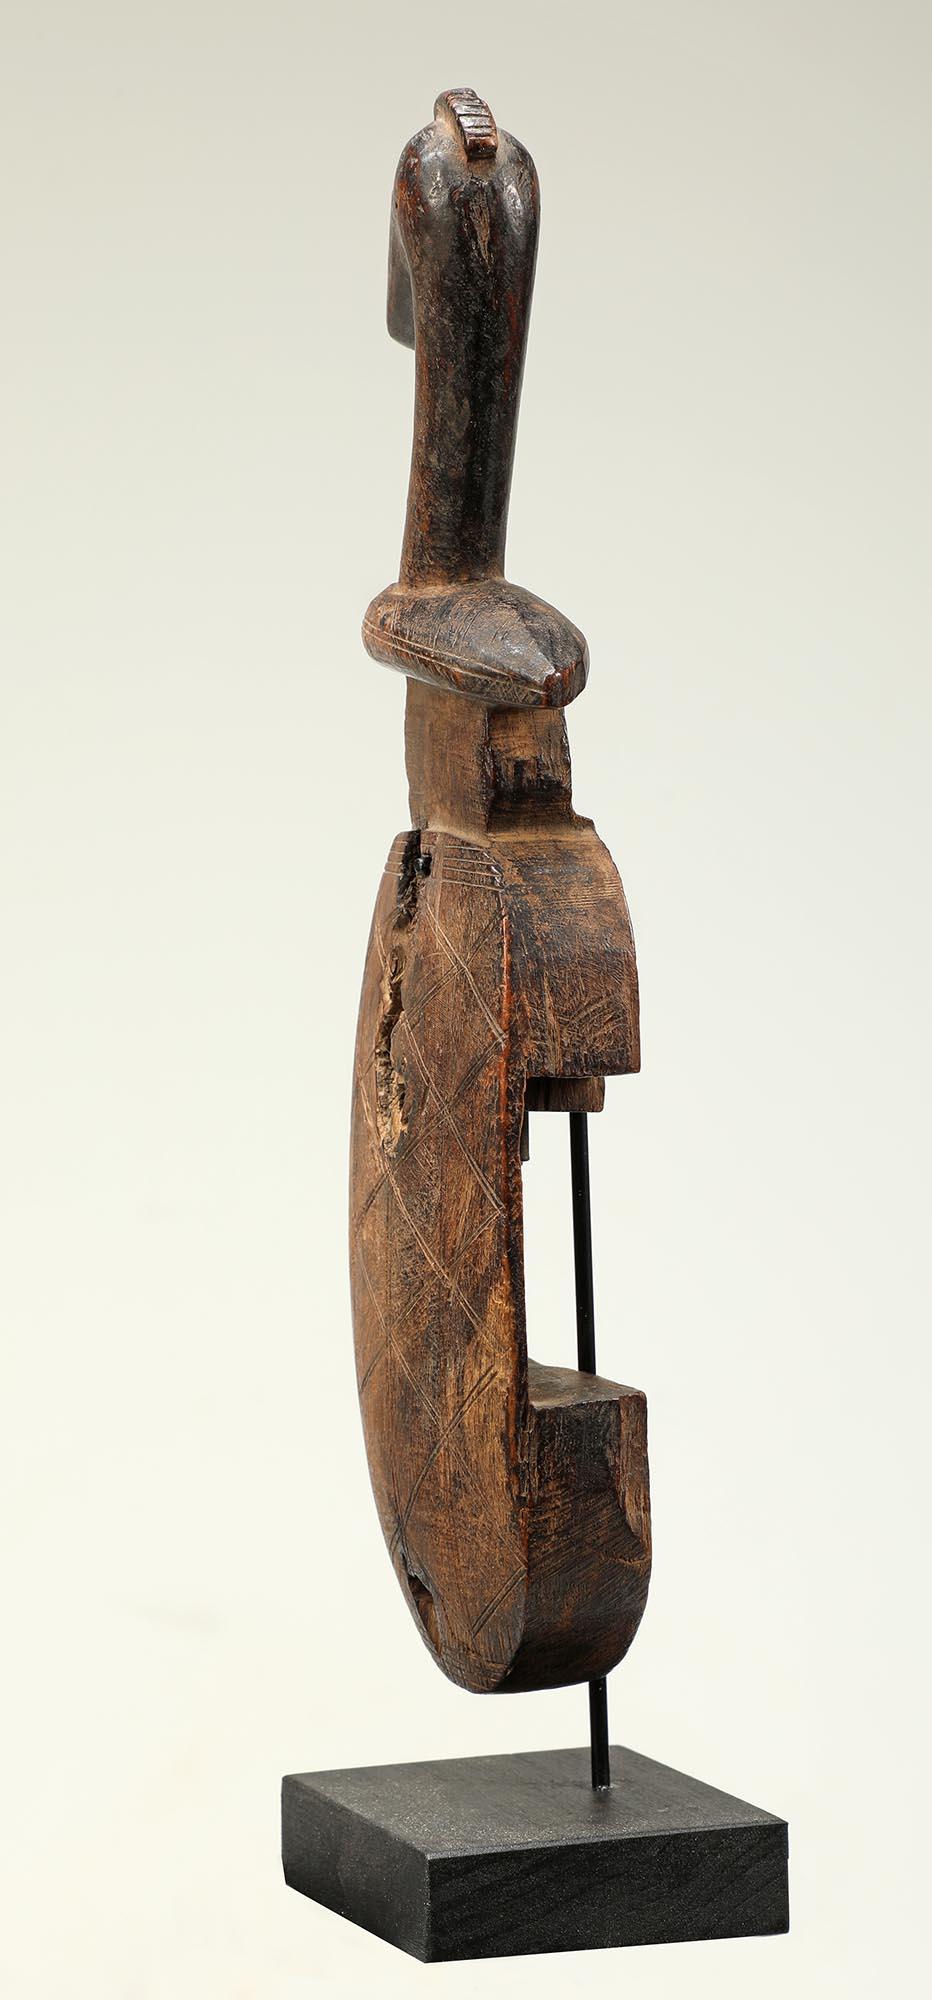 A very sweet small sized carved wood bird topped door lock from the Bambara people of Mali Africa. Originally would have had a horizontal sliding cross bar lock, now missing. Mounted on custom metal and wood stand. Wear and polish from use, some